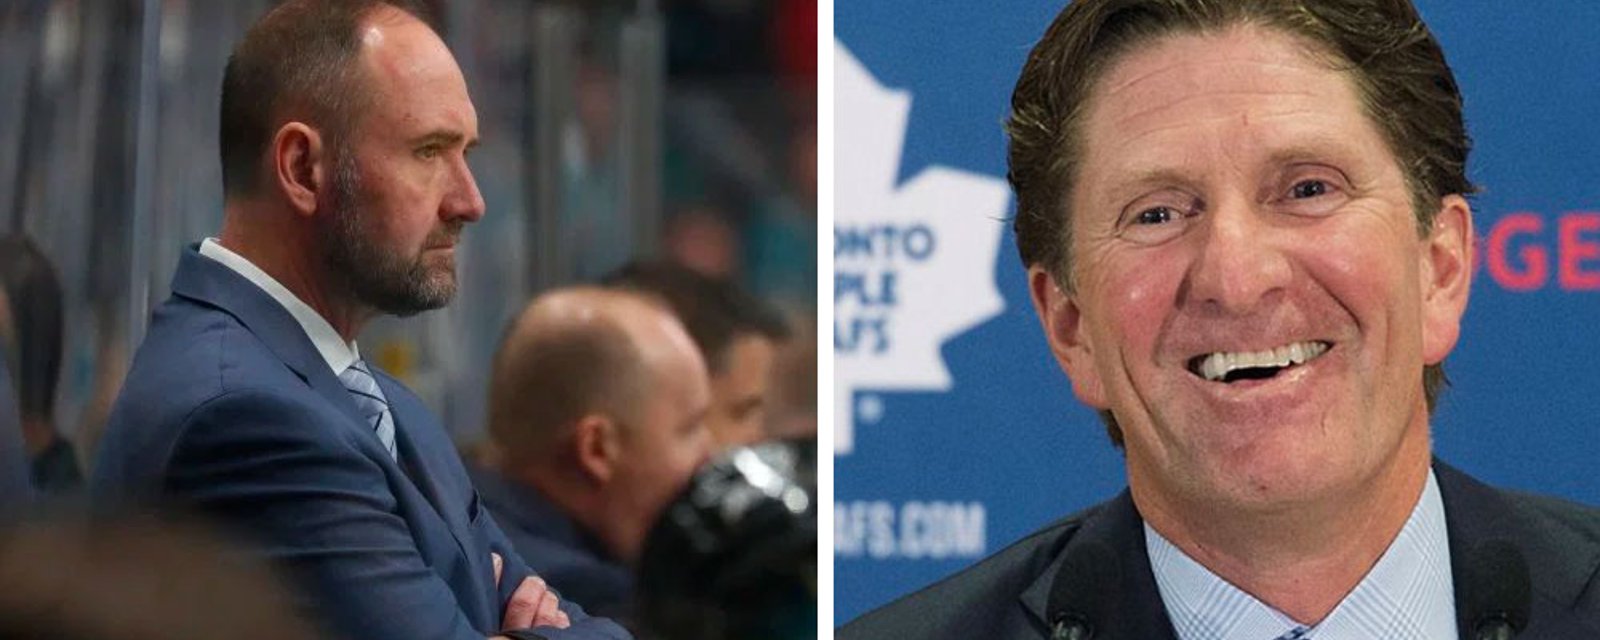 Sharks coach DeBoer makes hilarious comment on Leafs’ Babcock 